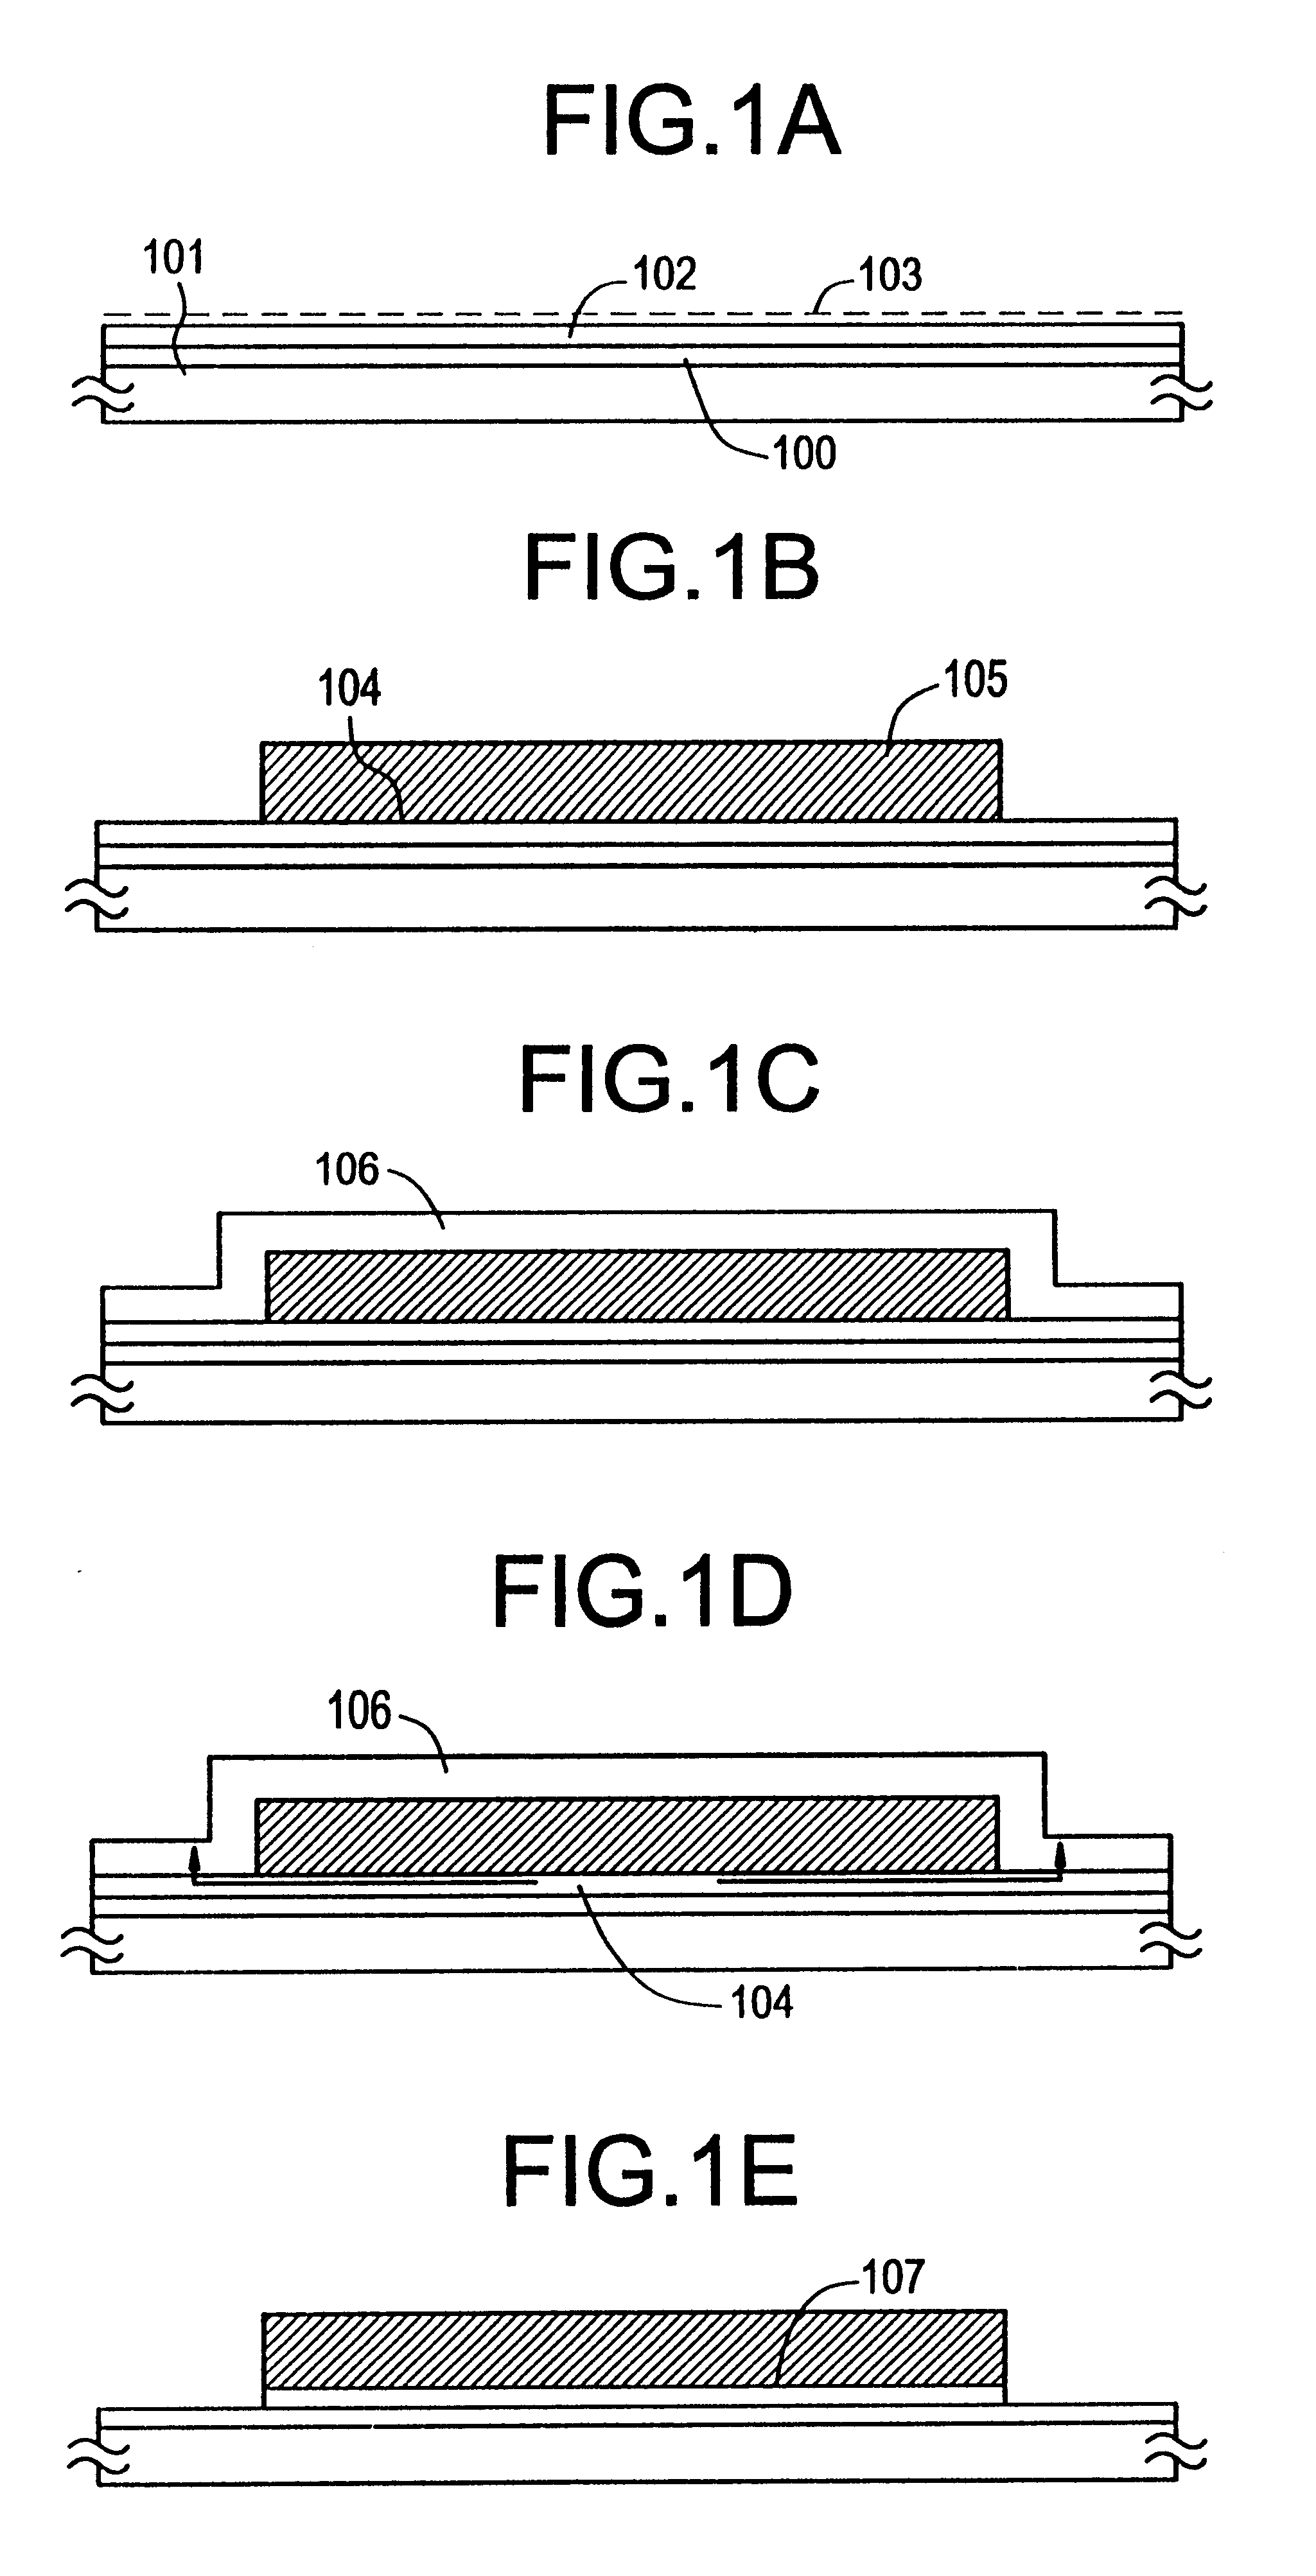 Method of forming a TFT by adding a metal to a silicon film promoting crystallization, forming a mask, forming another silicon layer with group XV elements, and gettering the metal through opening in the mask